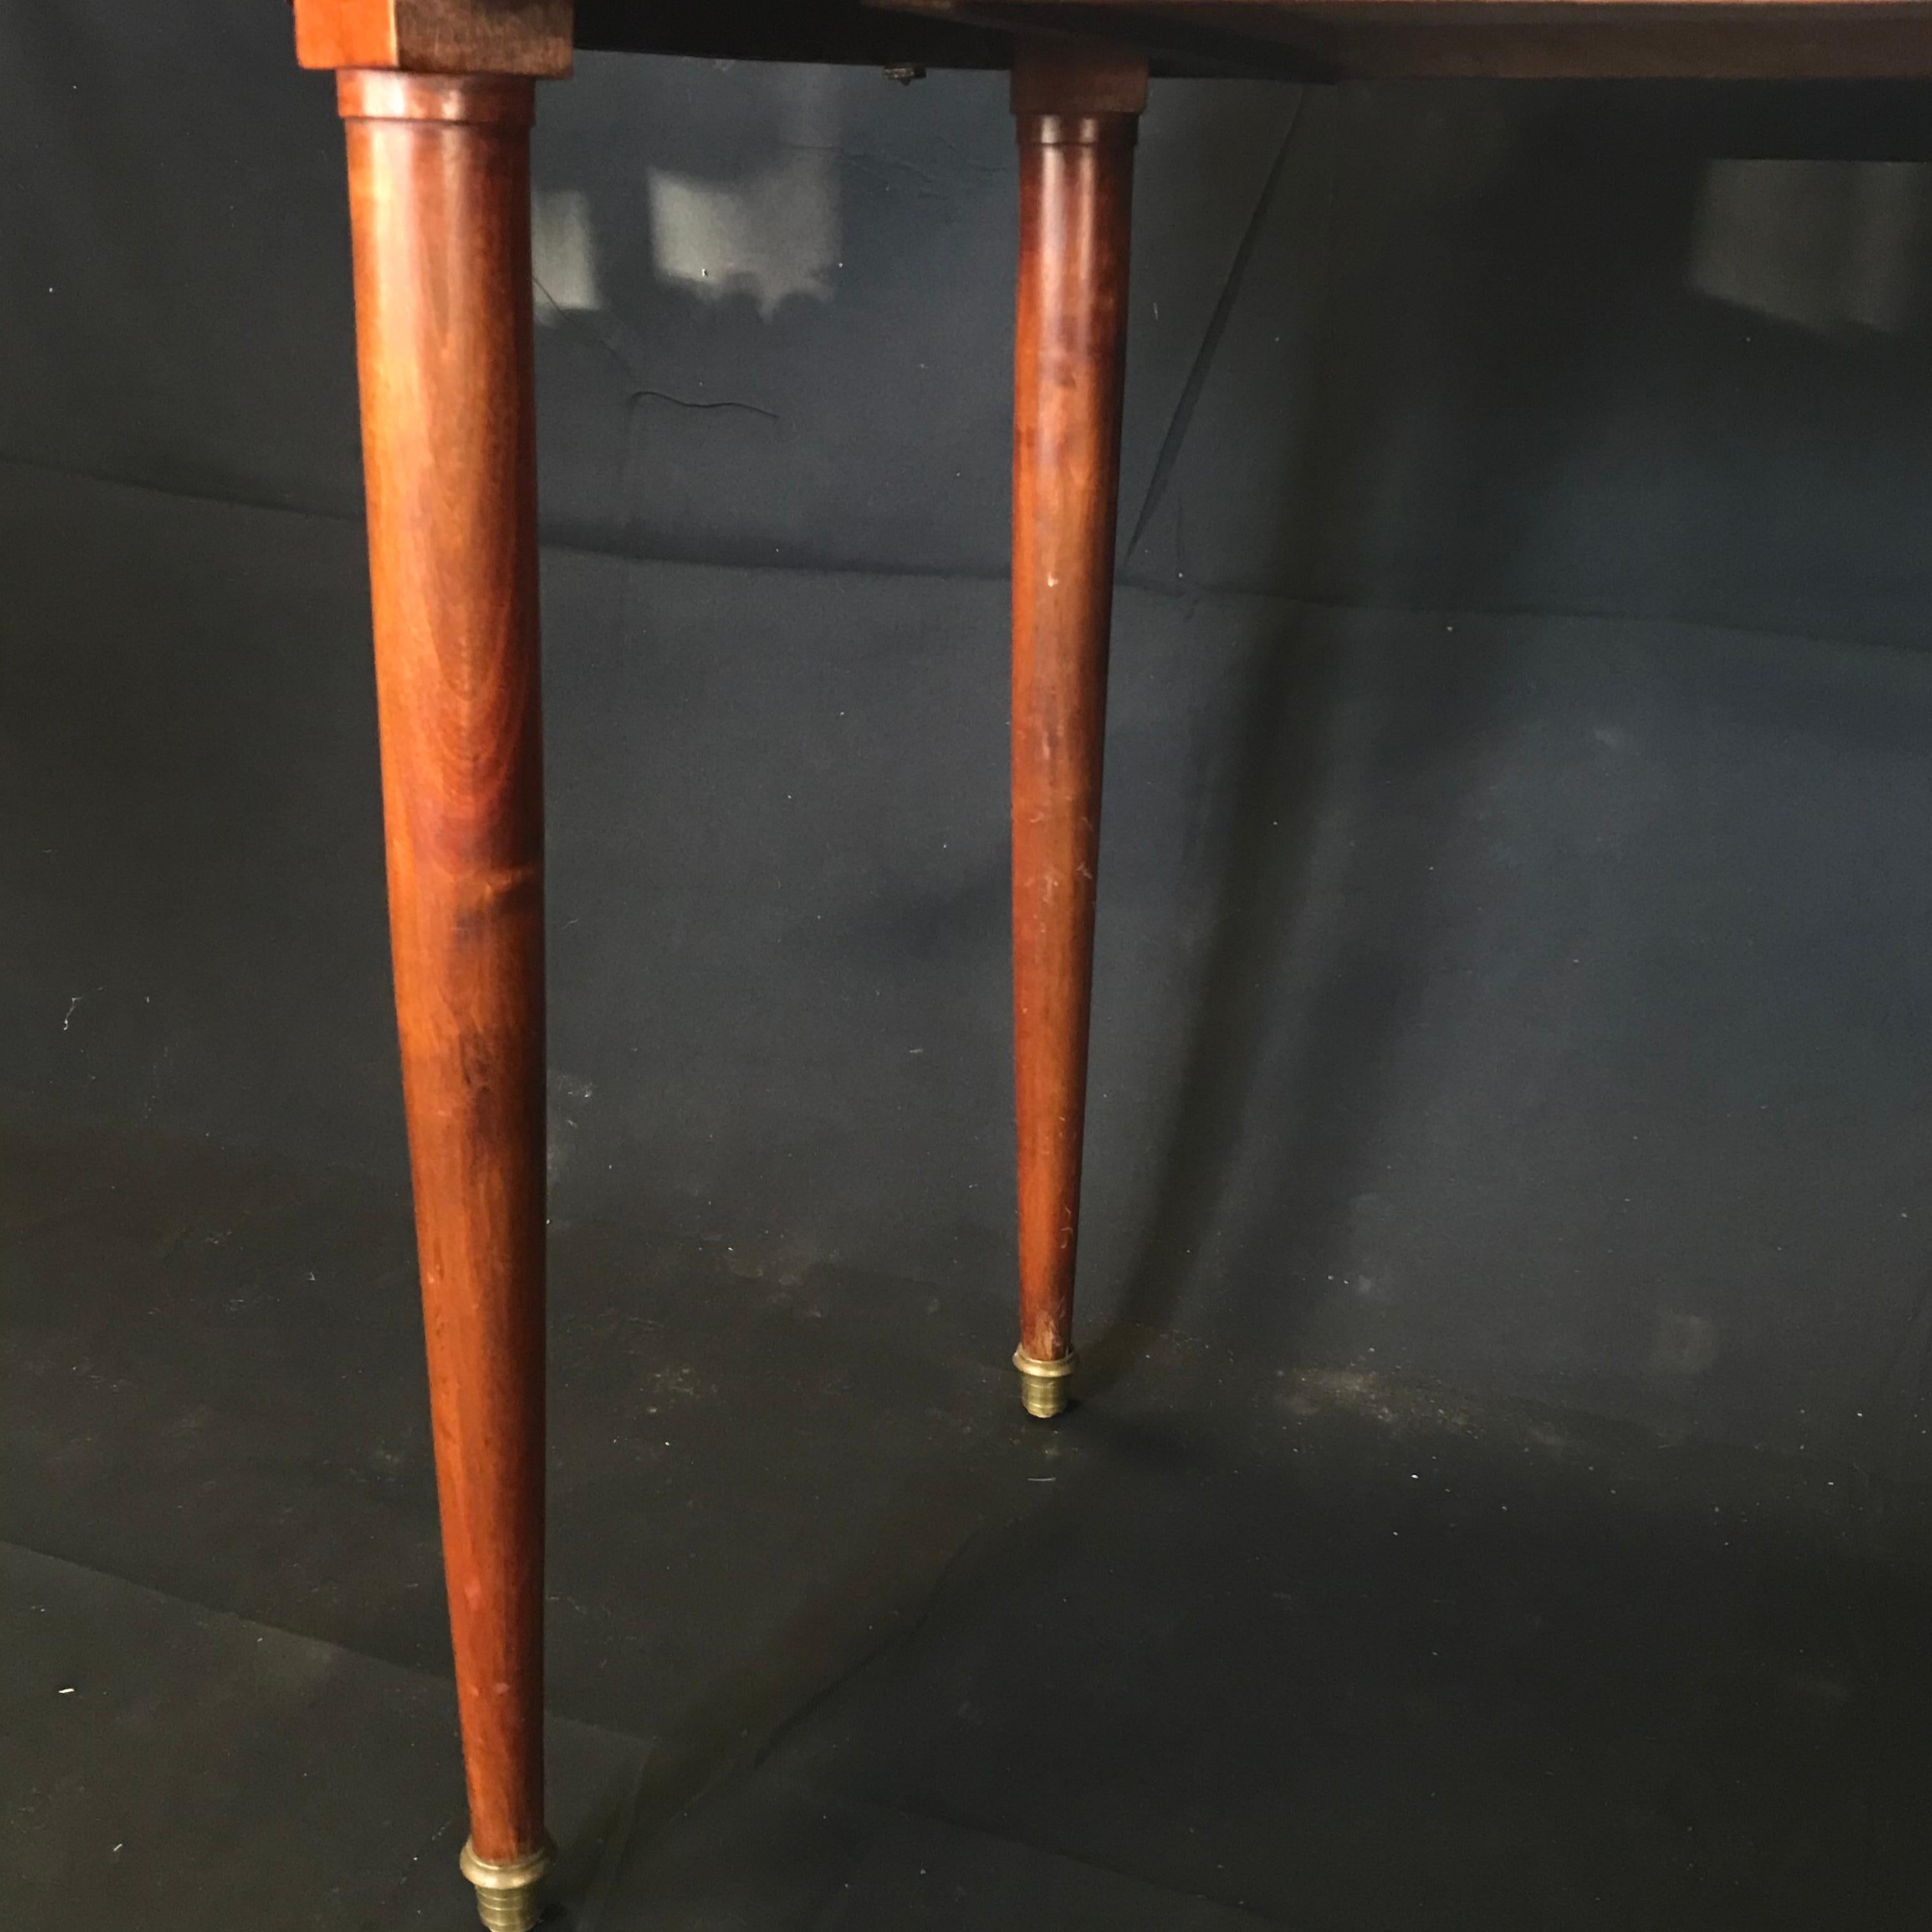 Romantic French Inlaid Walnut and Bronze Dressing Table with Candelabra Arms 10